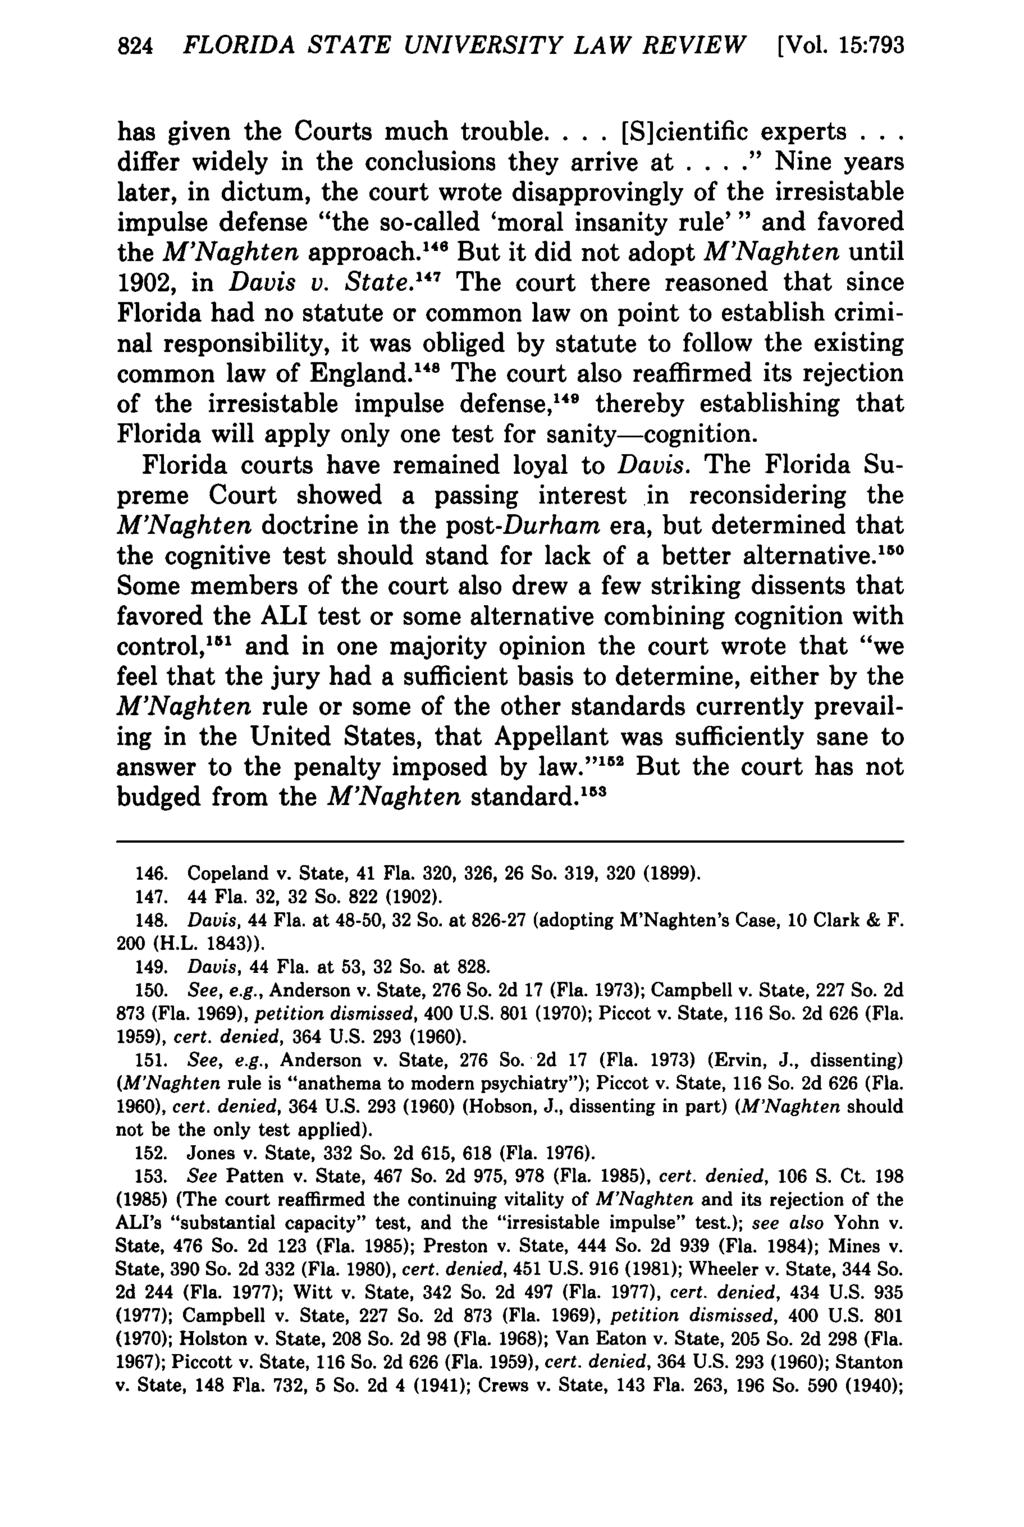 824 FLORIDA STATE UNIVERSITY LAW REVIEW [Vol. 15:793 has given the Courts much trouble... [S]cientific experts... differ widely in the conclusions they arrive at.